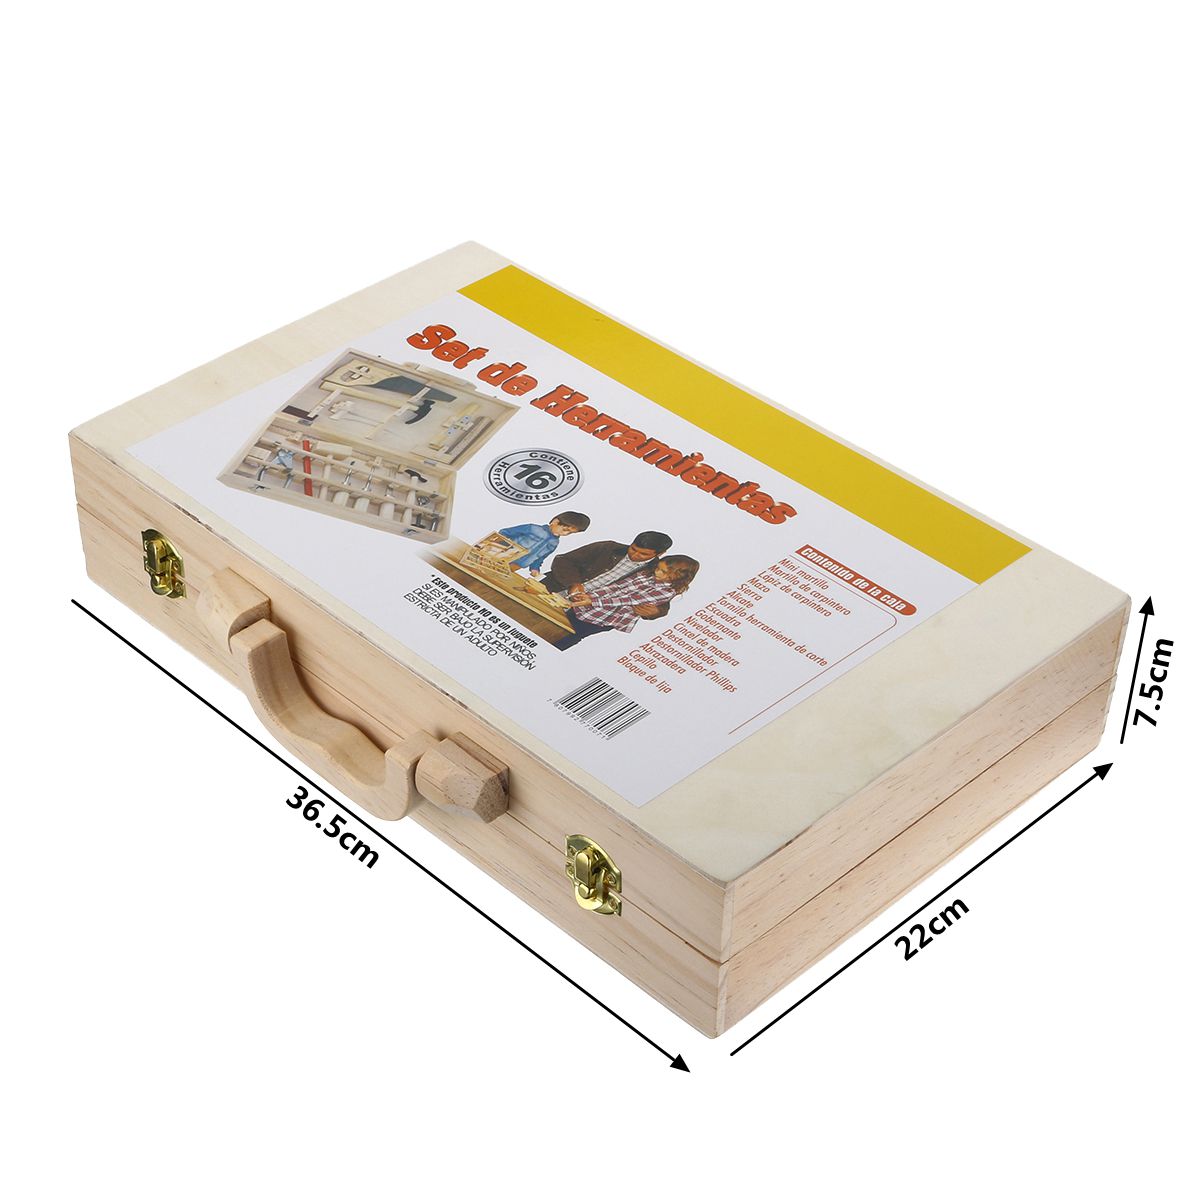 Kid-Wooden-Storage-Toy-Tool-Set-ToolBox-DIY-Educational-Bench-Learning-Role-Play-1253694